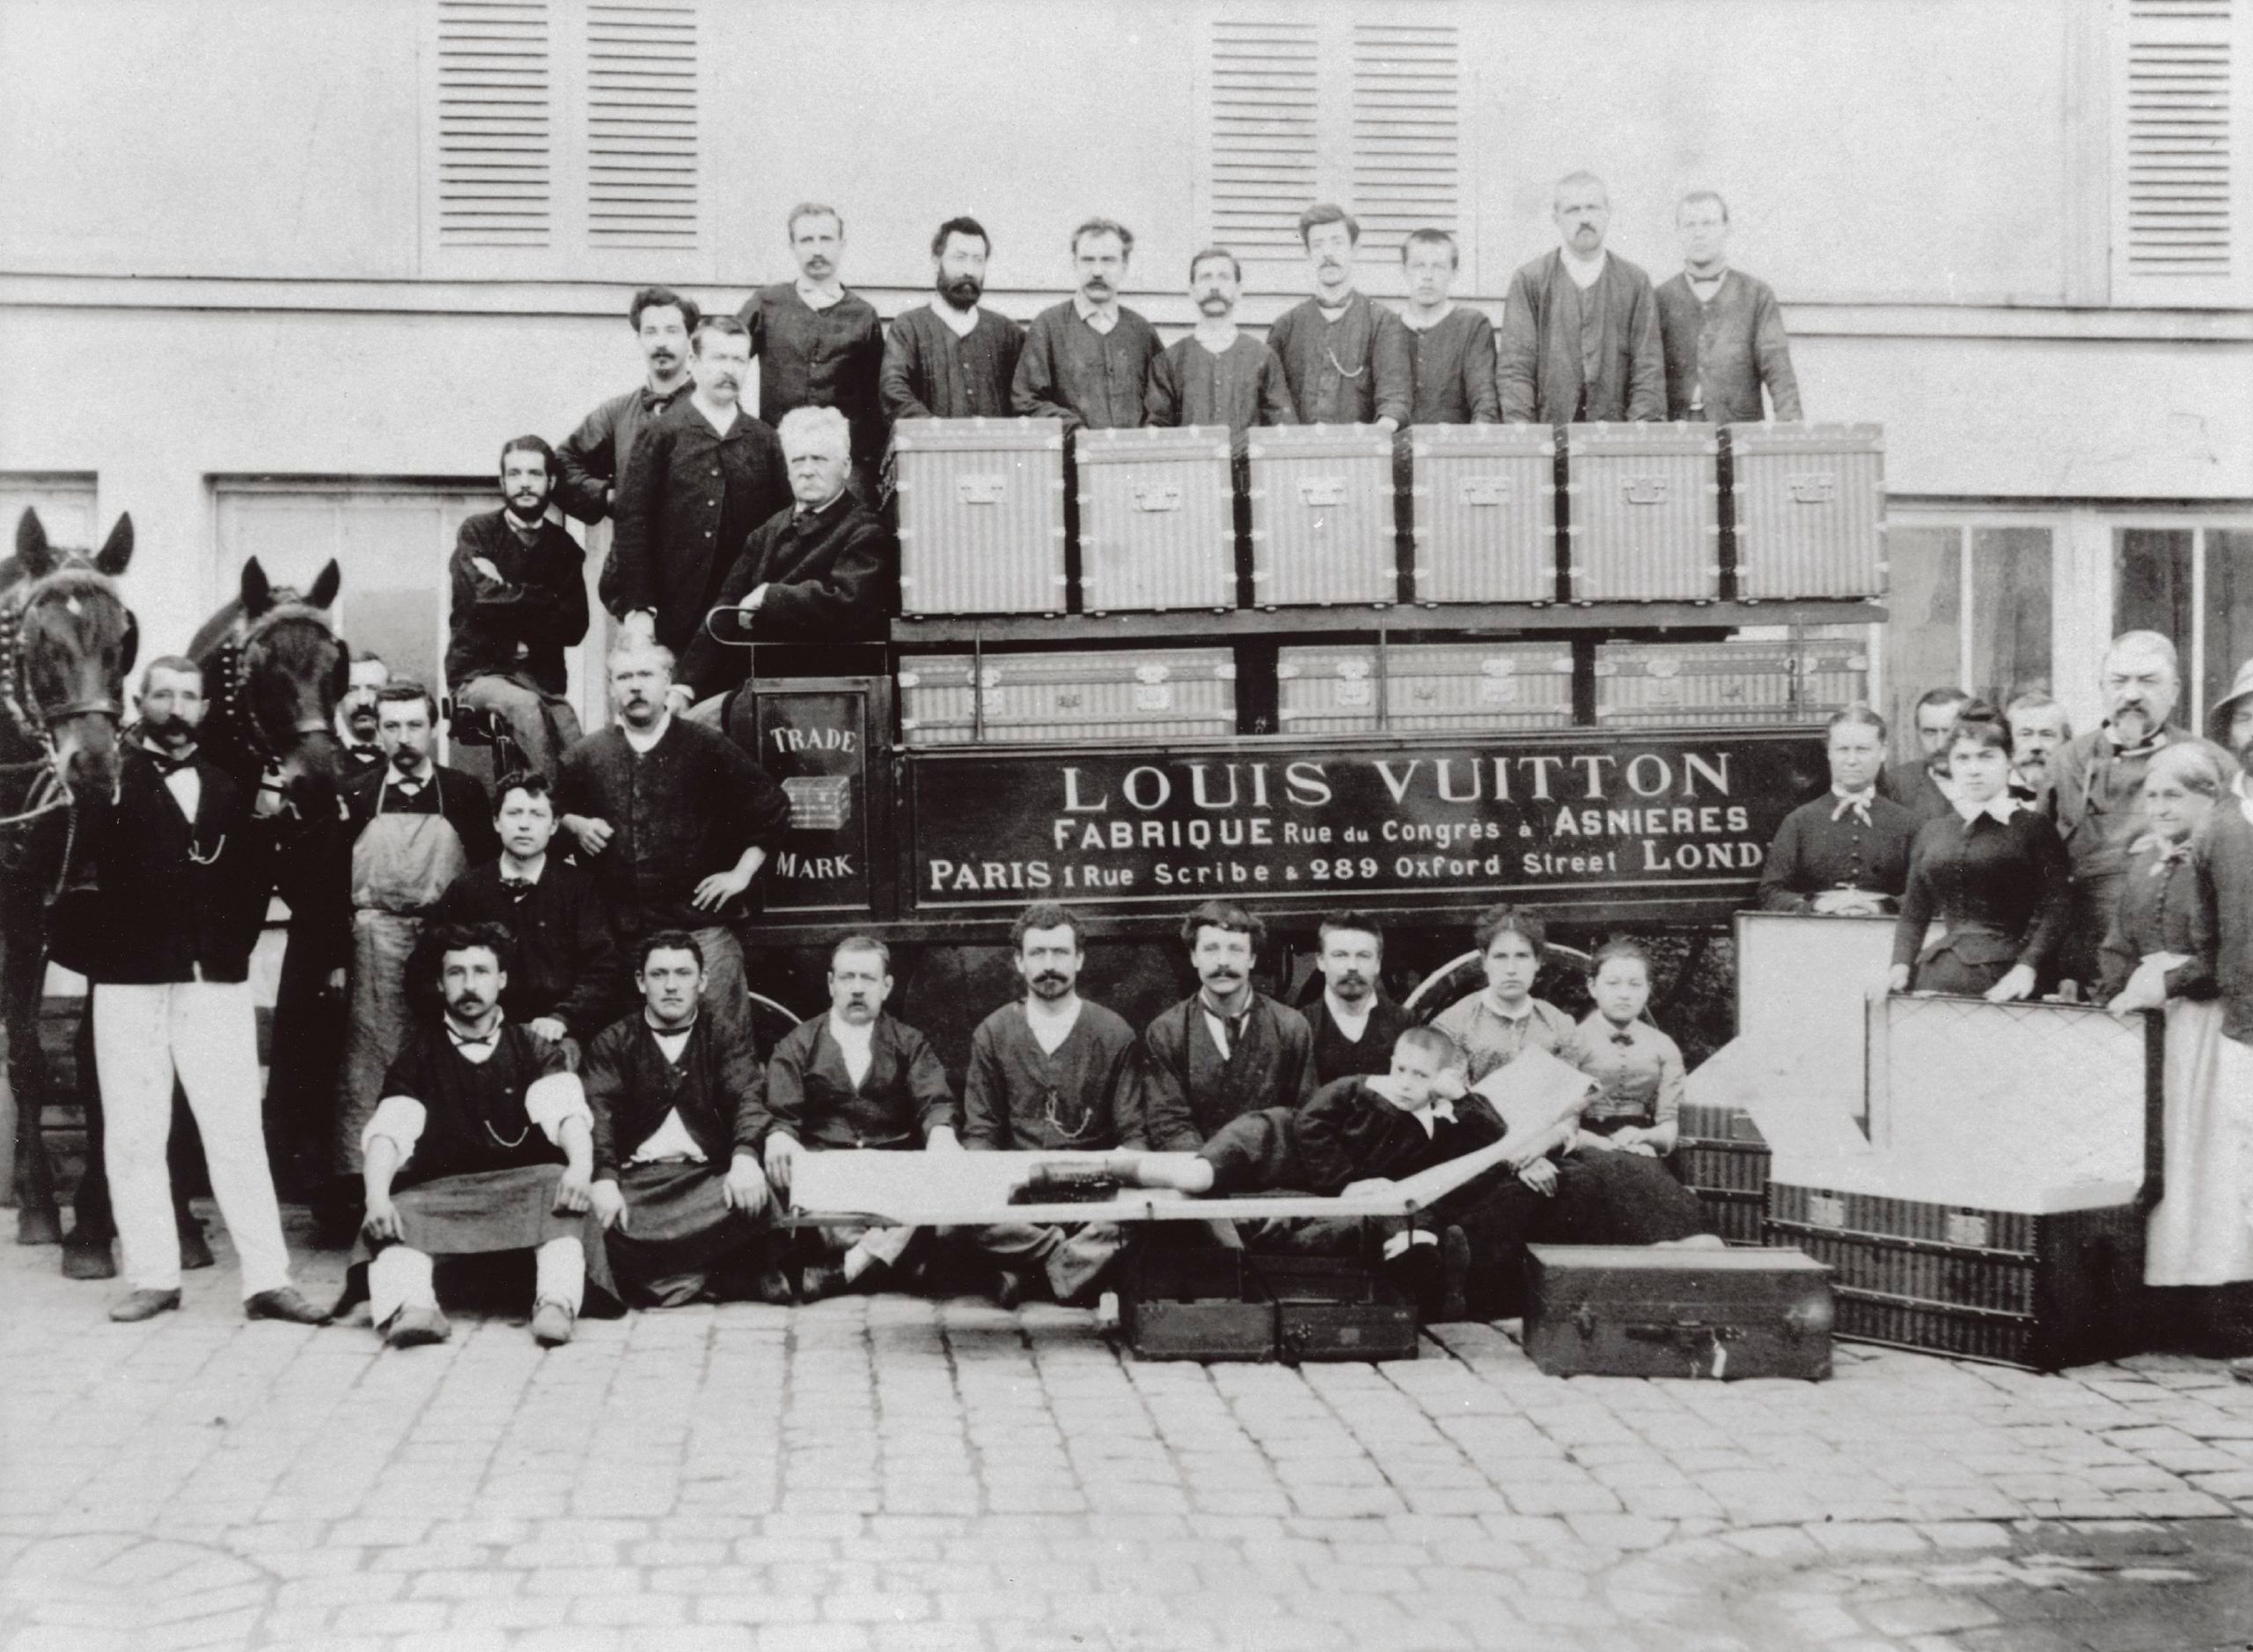 Icons before Instagram: How Louis Vuitton is celebrated 200 years later